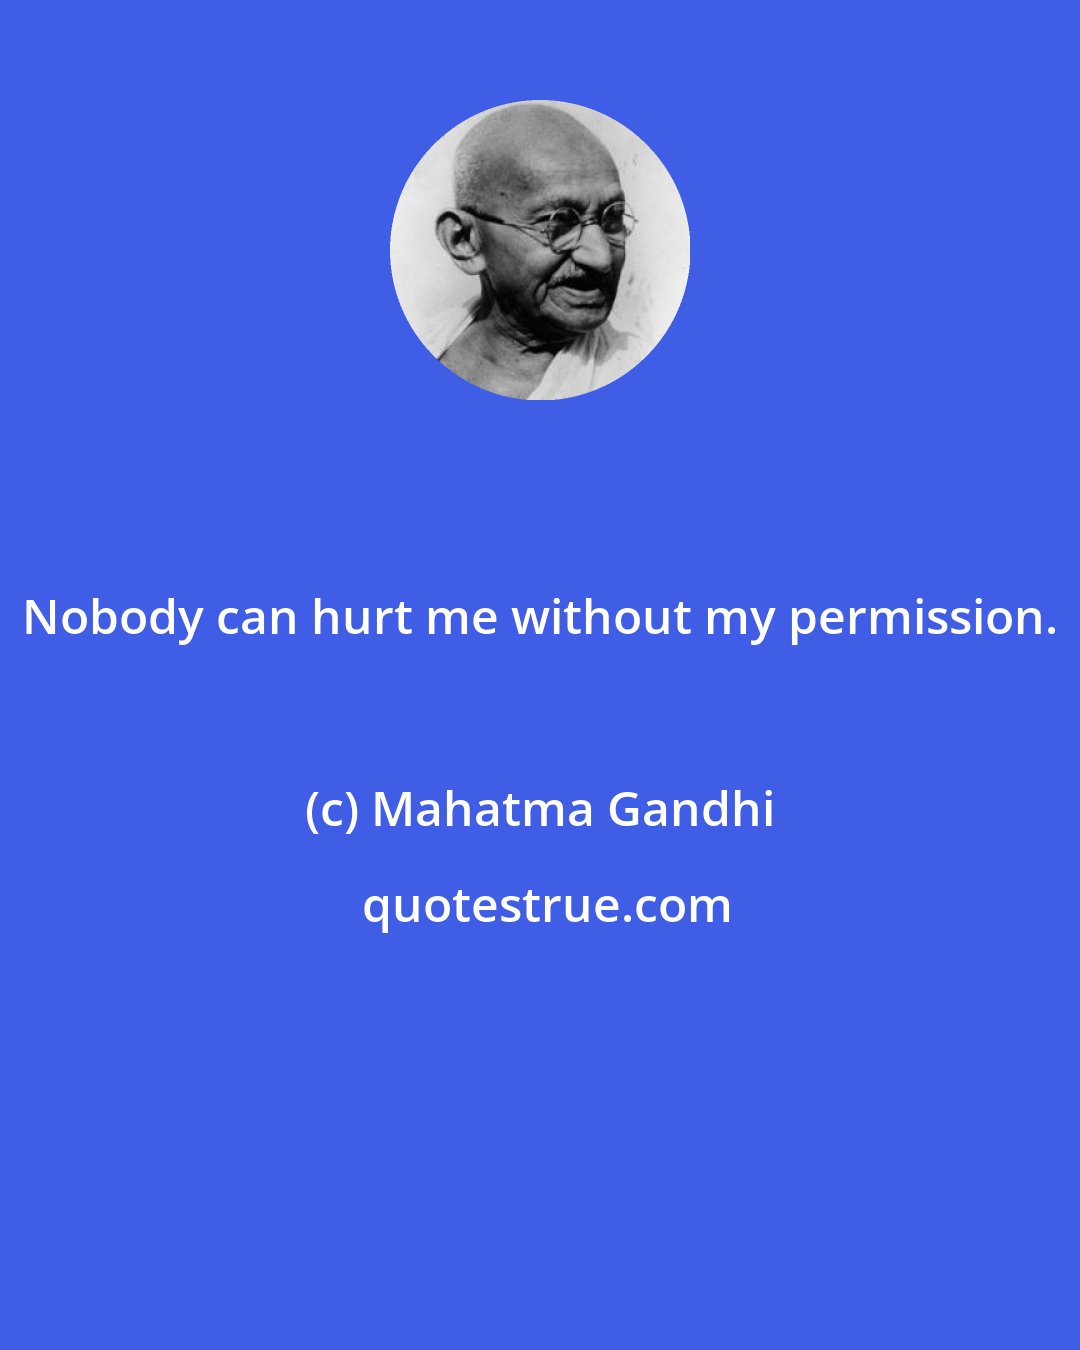 Mahatma Gandhi: Nobody can hurt me without my permission.